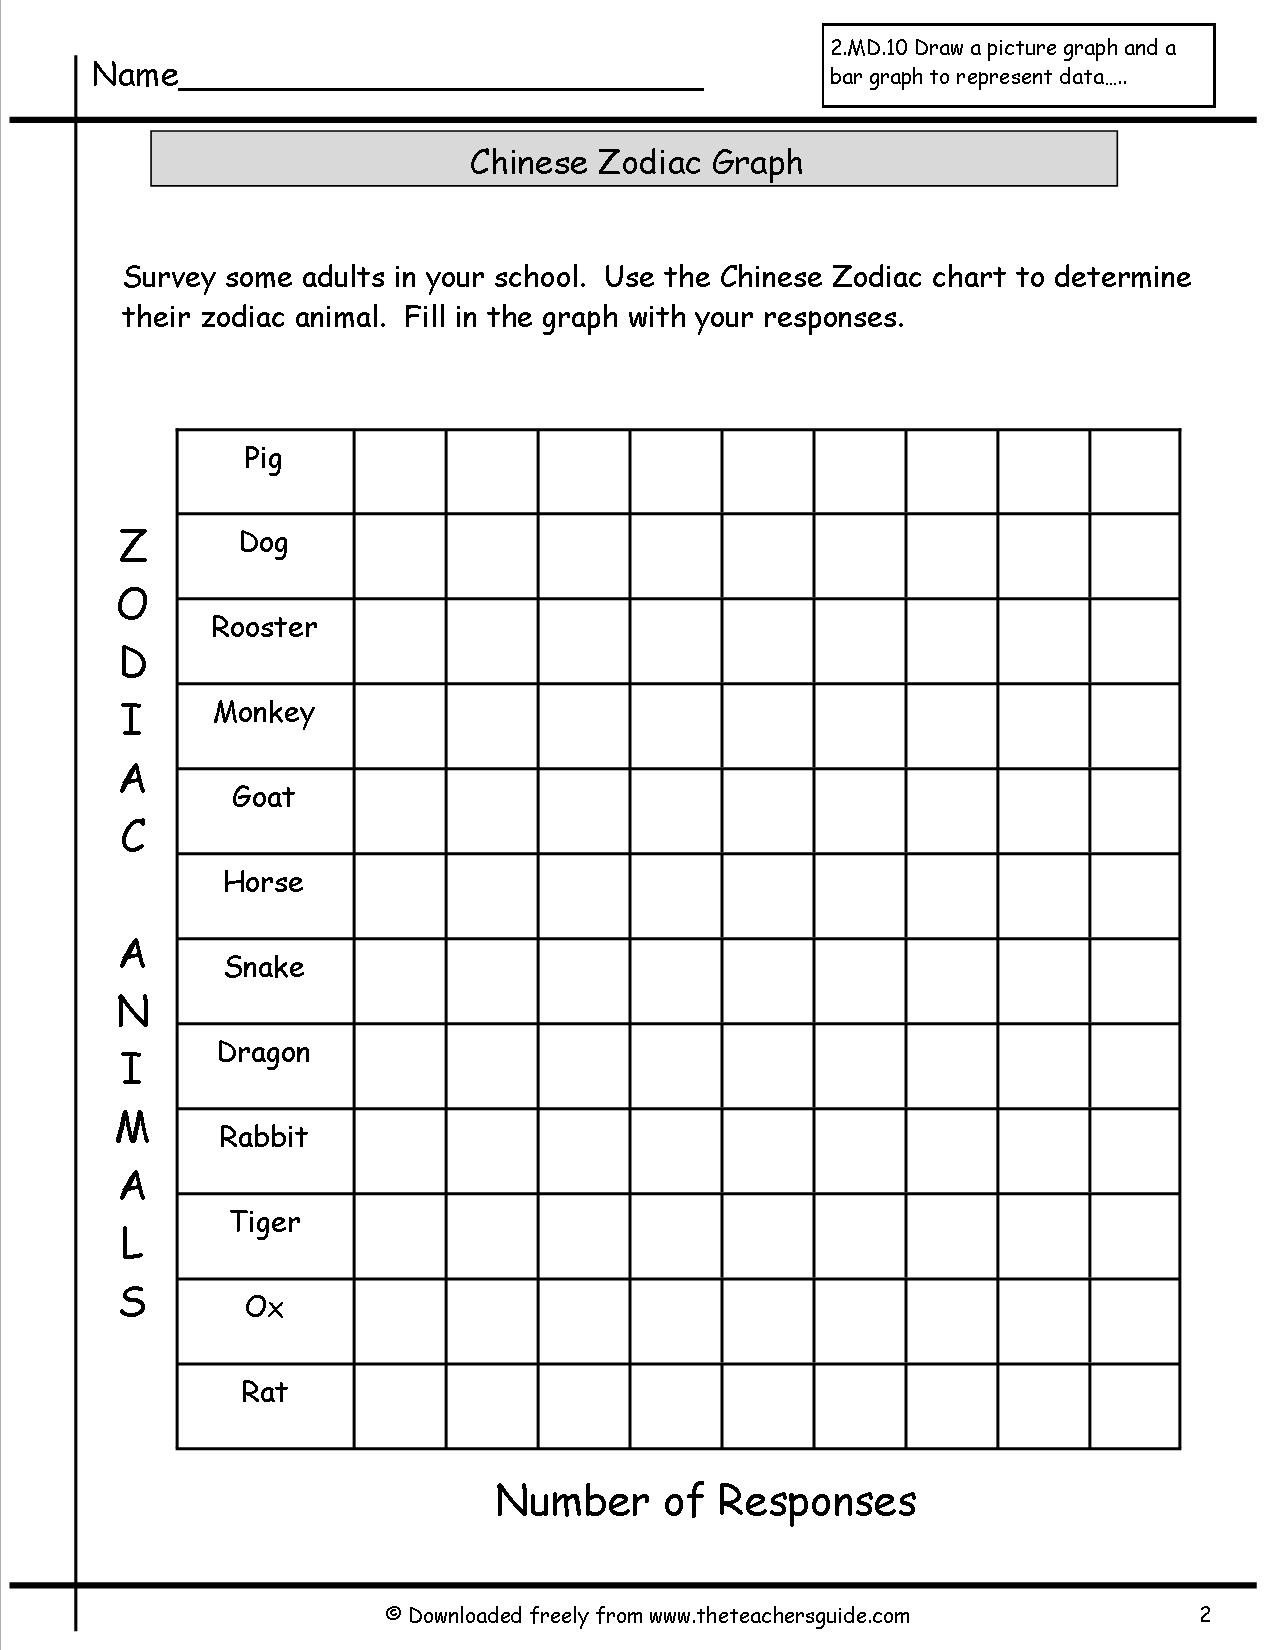 Reading And Creating Bar Graphs Worksheets From The Teacher&amp;#039;s Guide - Free Printable Blank Bar Graph Worksheets